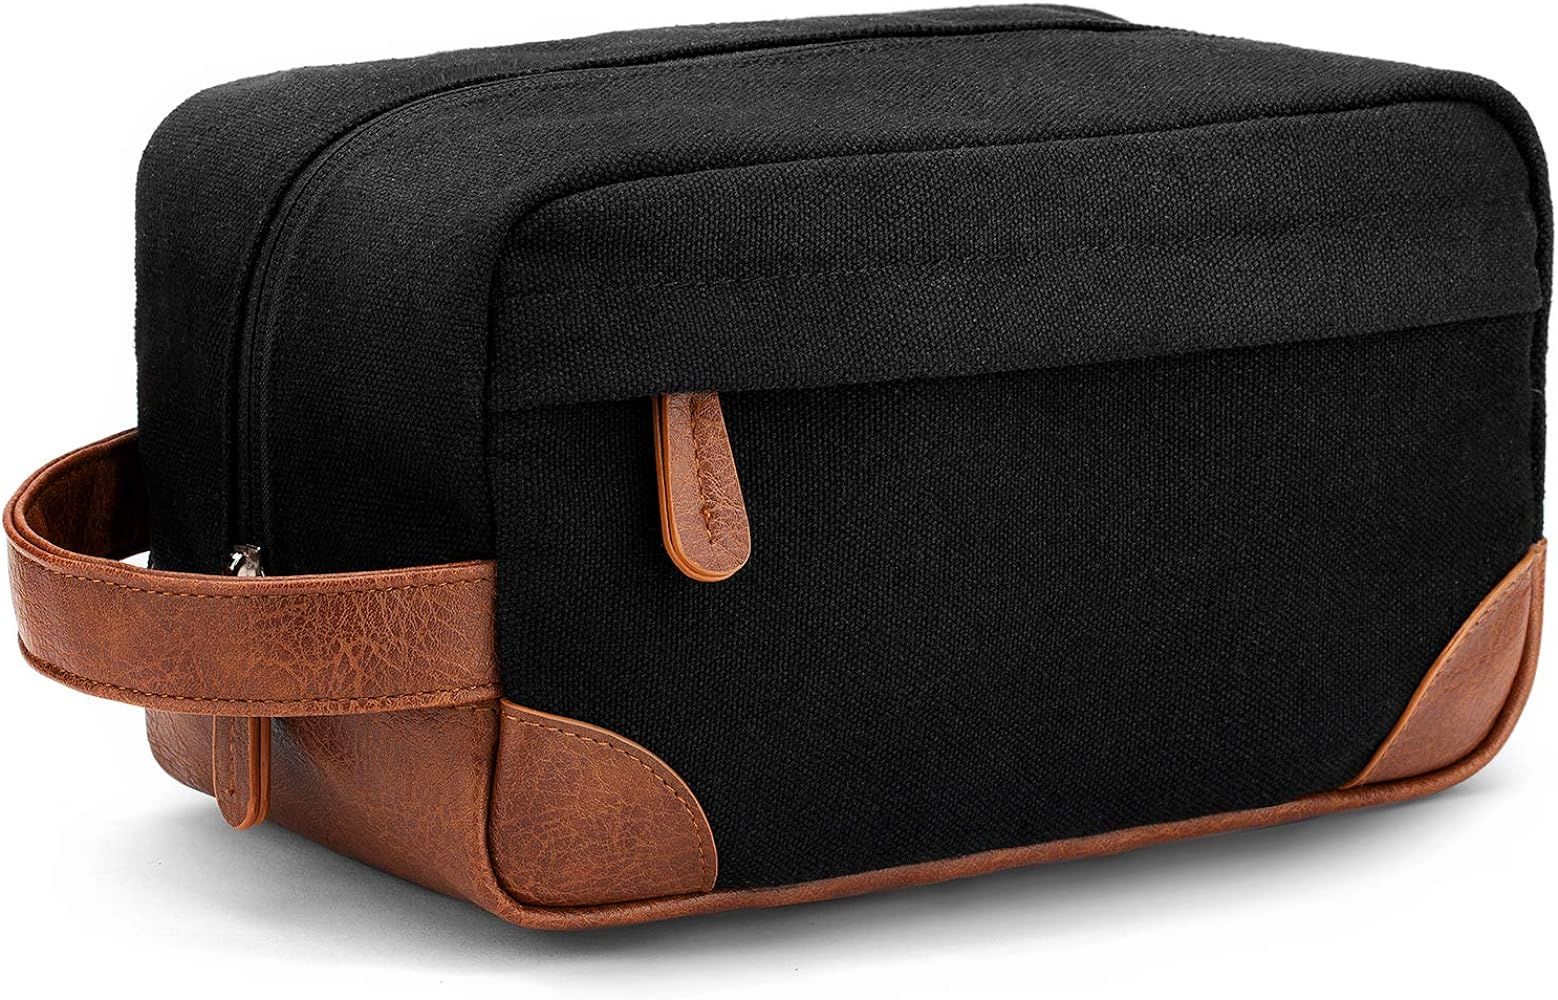 Vorspack Toiletry Bag Hanging Dopp Kit for Men Water Resistant Canvas Shaving Bag with Large Capacit | Amazon (US)